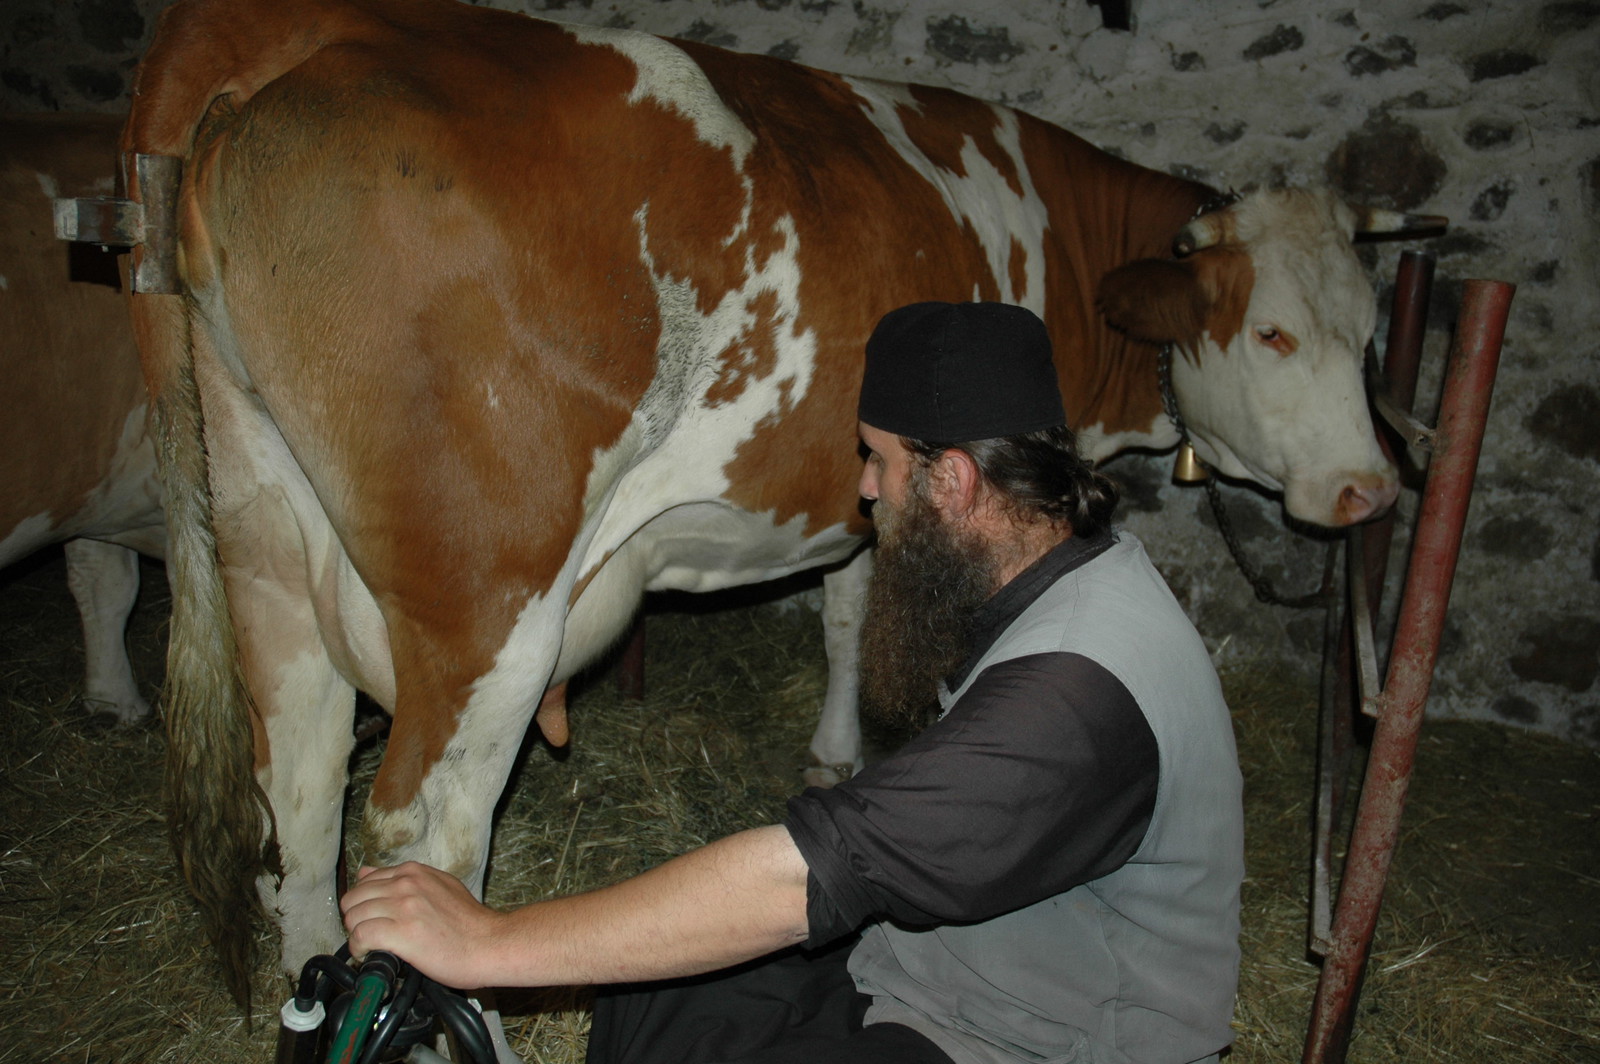 Milking the cows 5